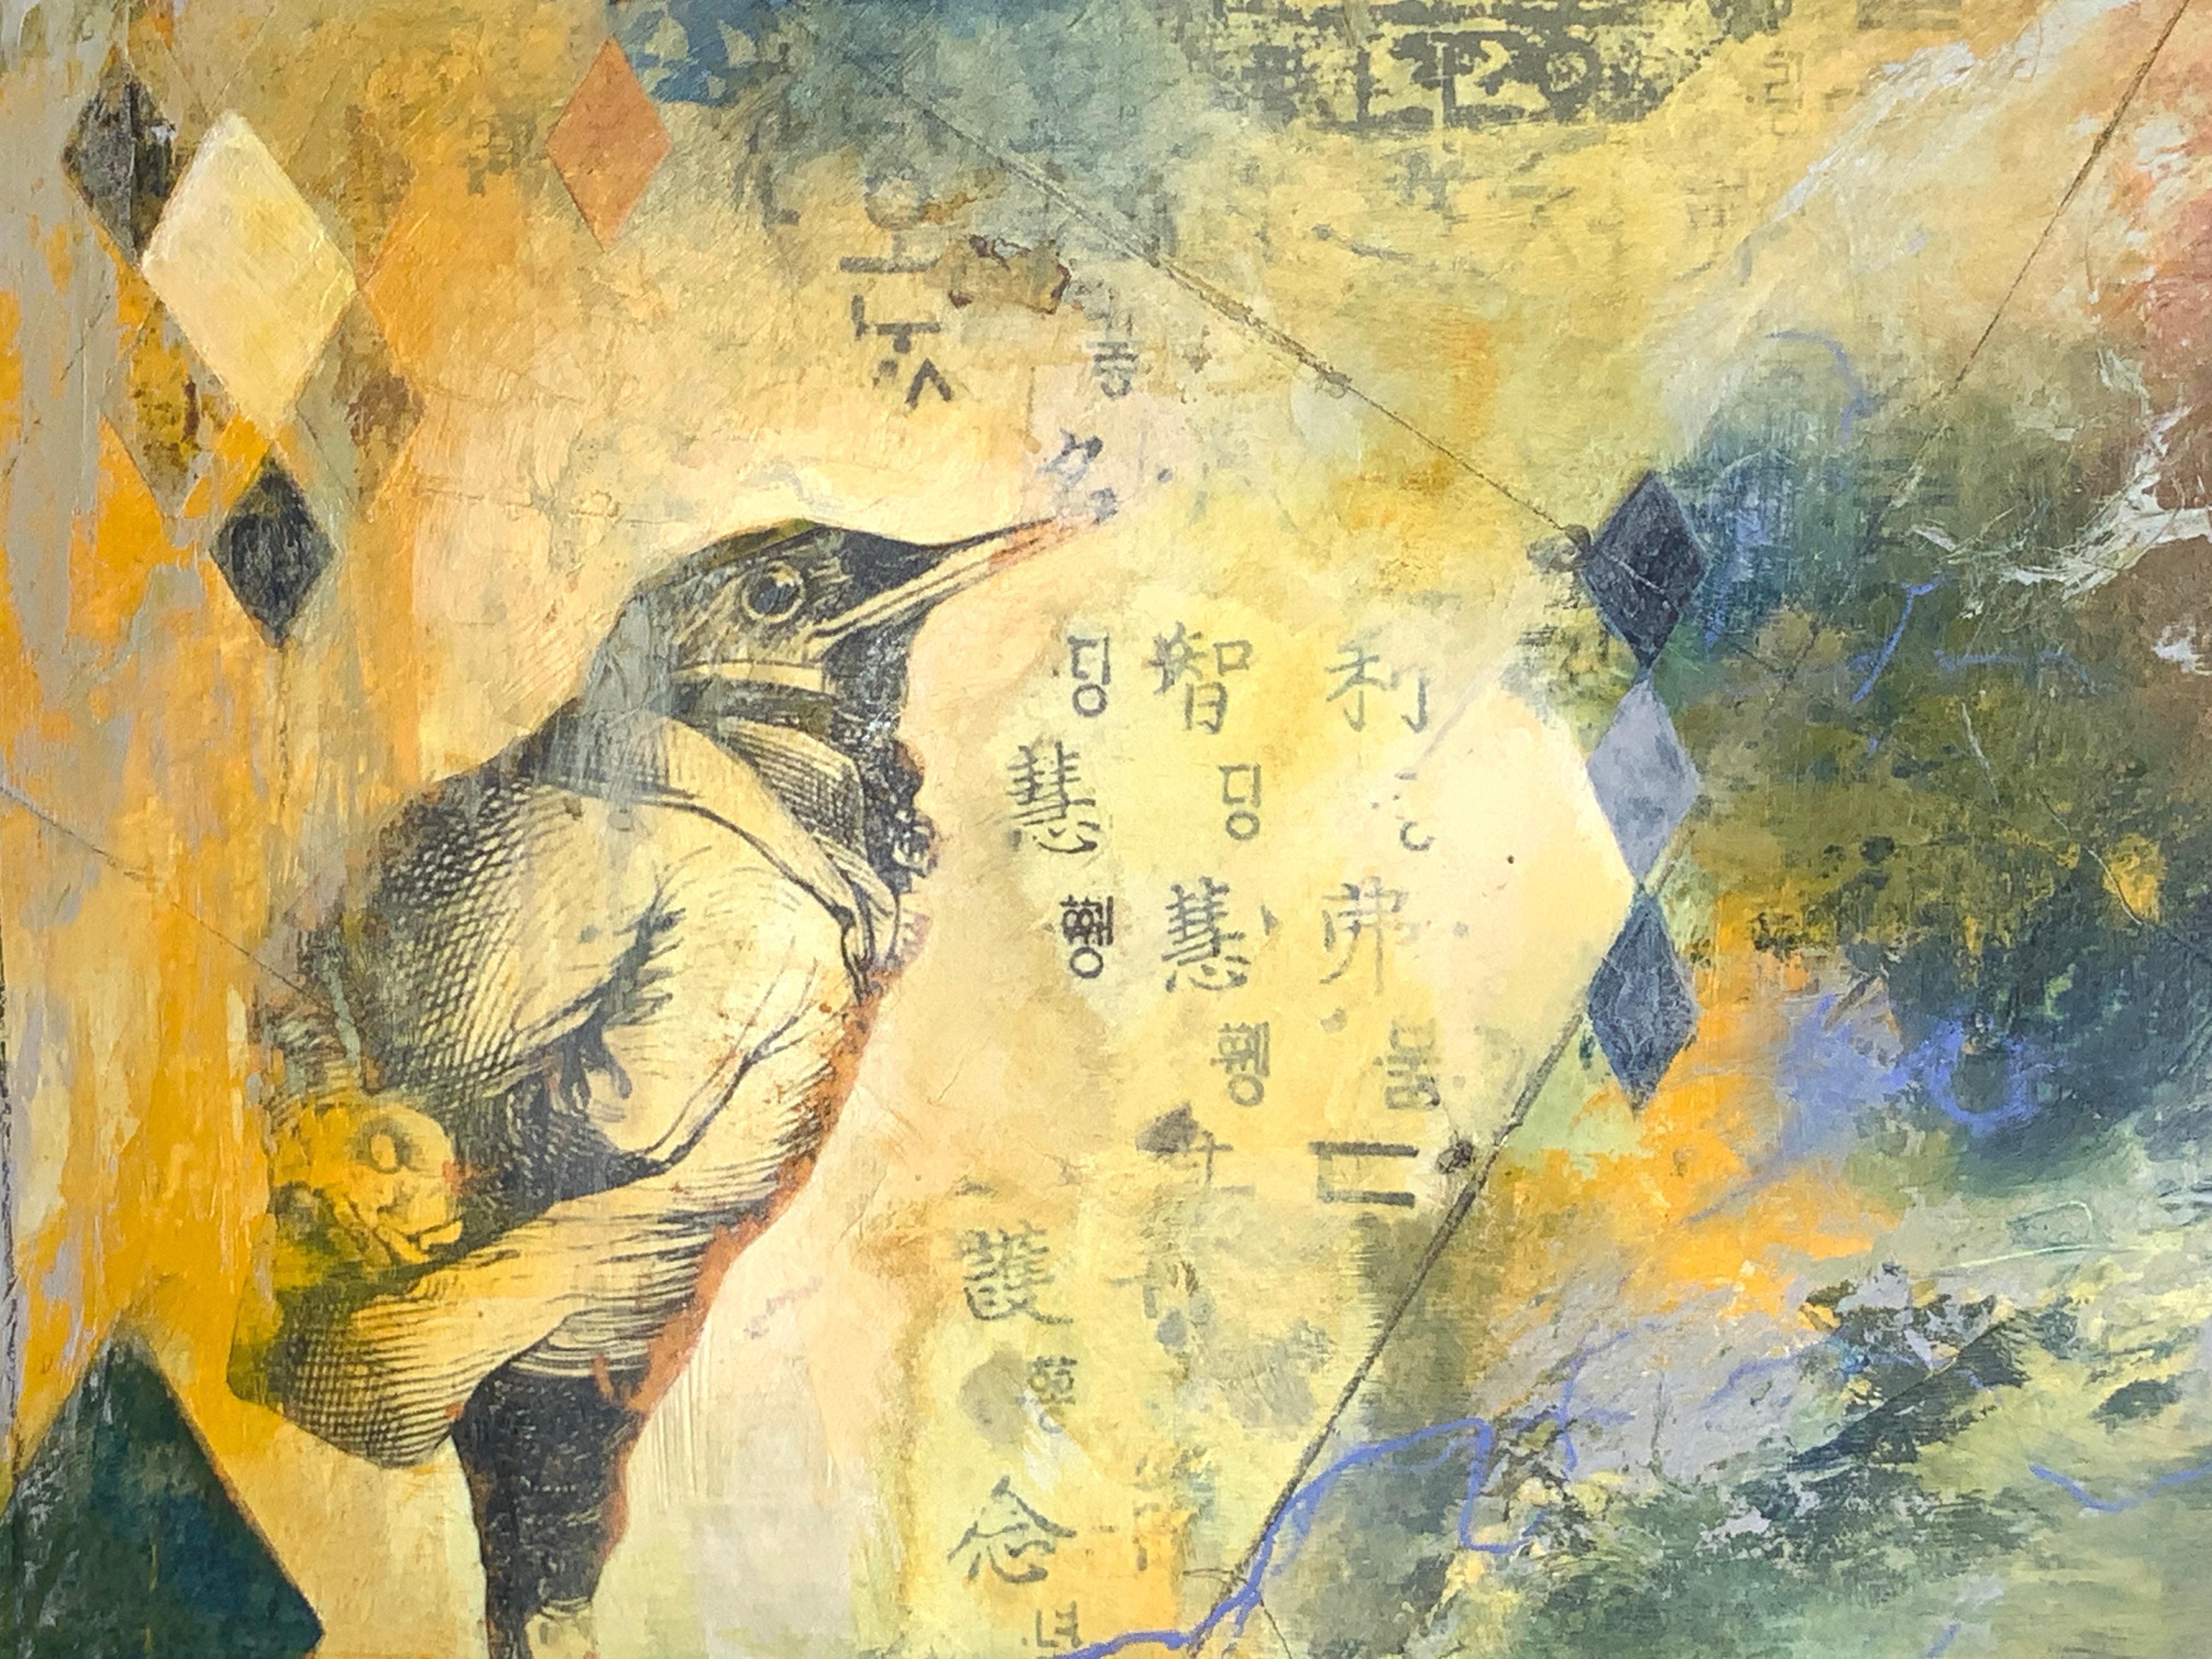 <p>Artist Comments<br>Artist Steph Gimson sets a small bird in a coat staring into the abyss. She collages pages of old Korean books to add points of interest to the yellow background. Part of her Whimsical collection that explores fantasy themes.